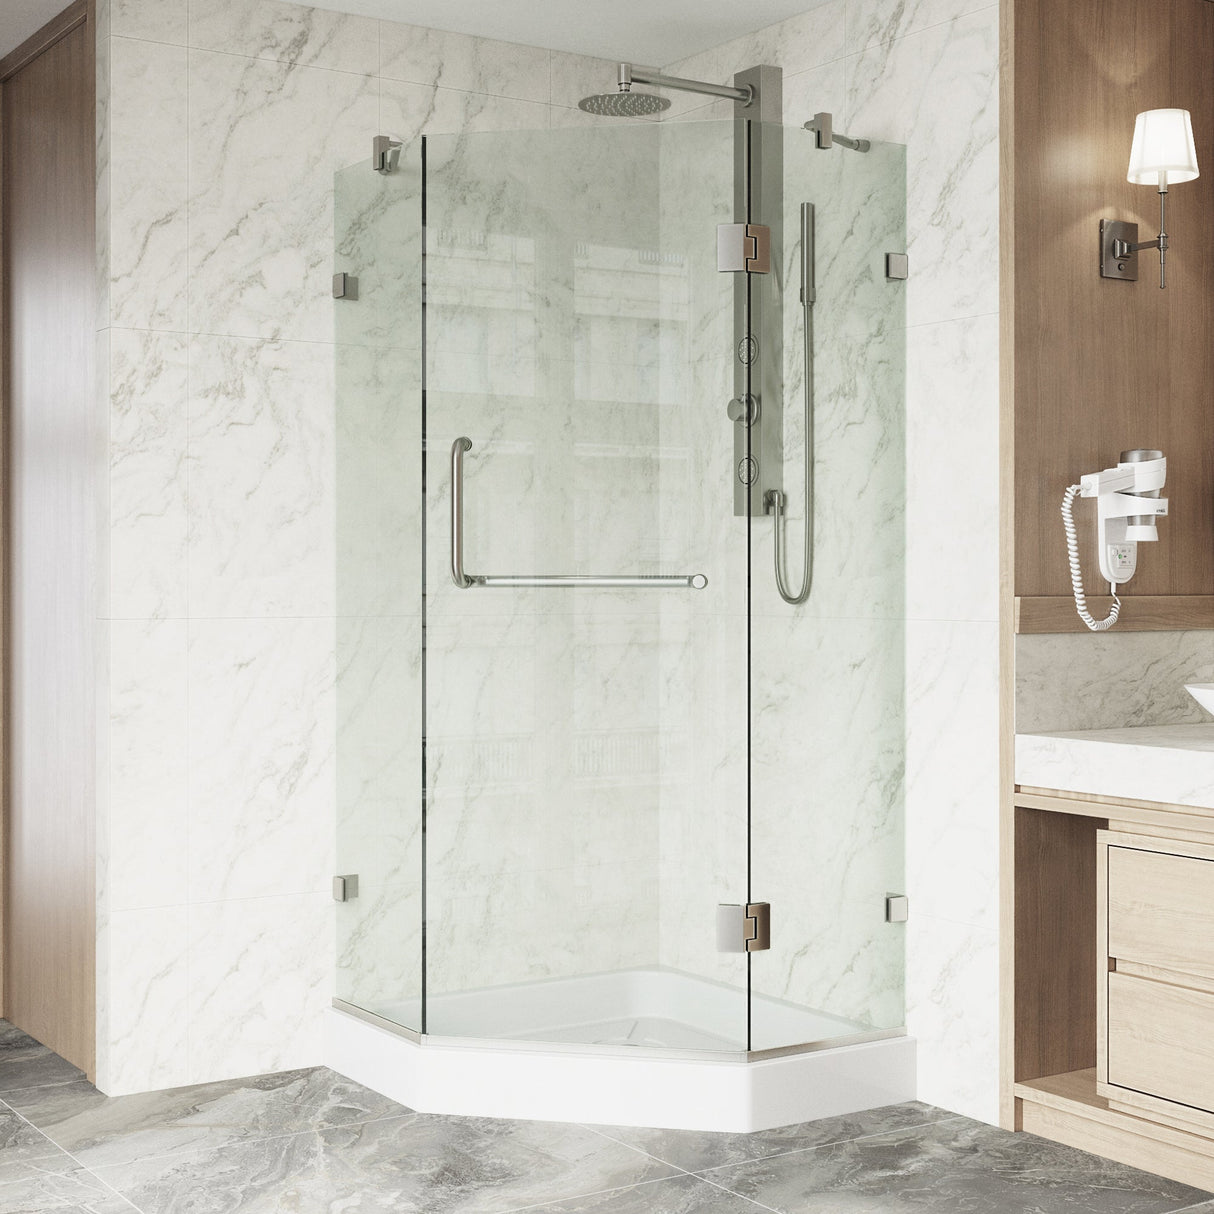 VIGO Piedmont 36.125 W x 70.375 H Frameless Hinged Shower Enclosure in Brushed Nickel with shower base and handle VG6062BNCL36W